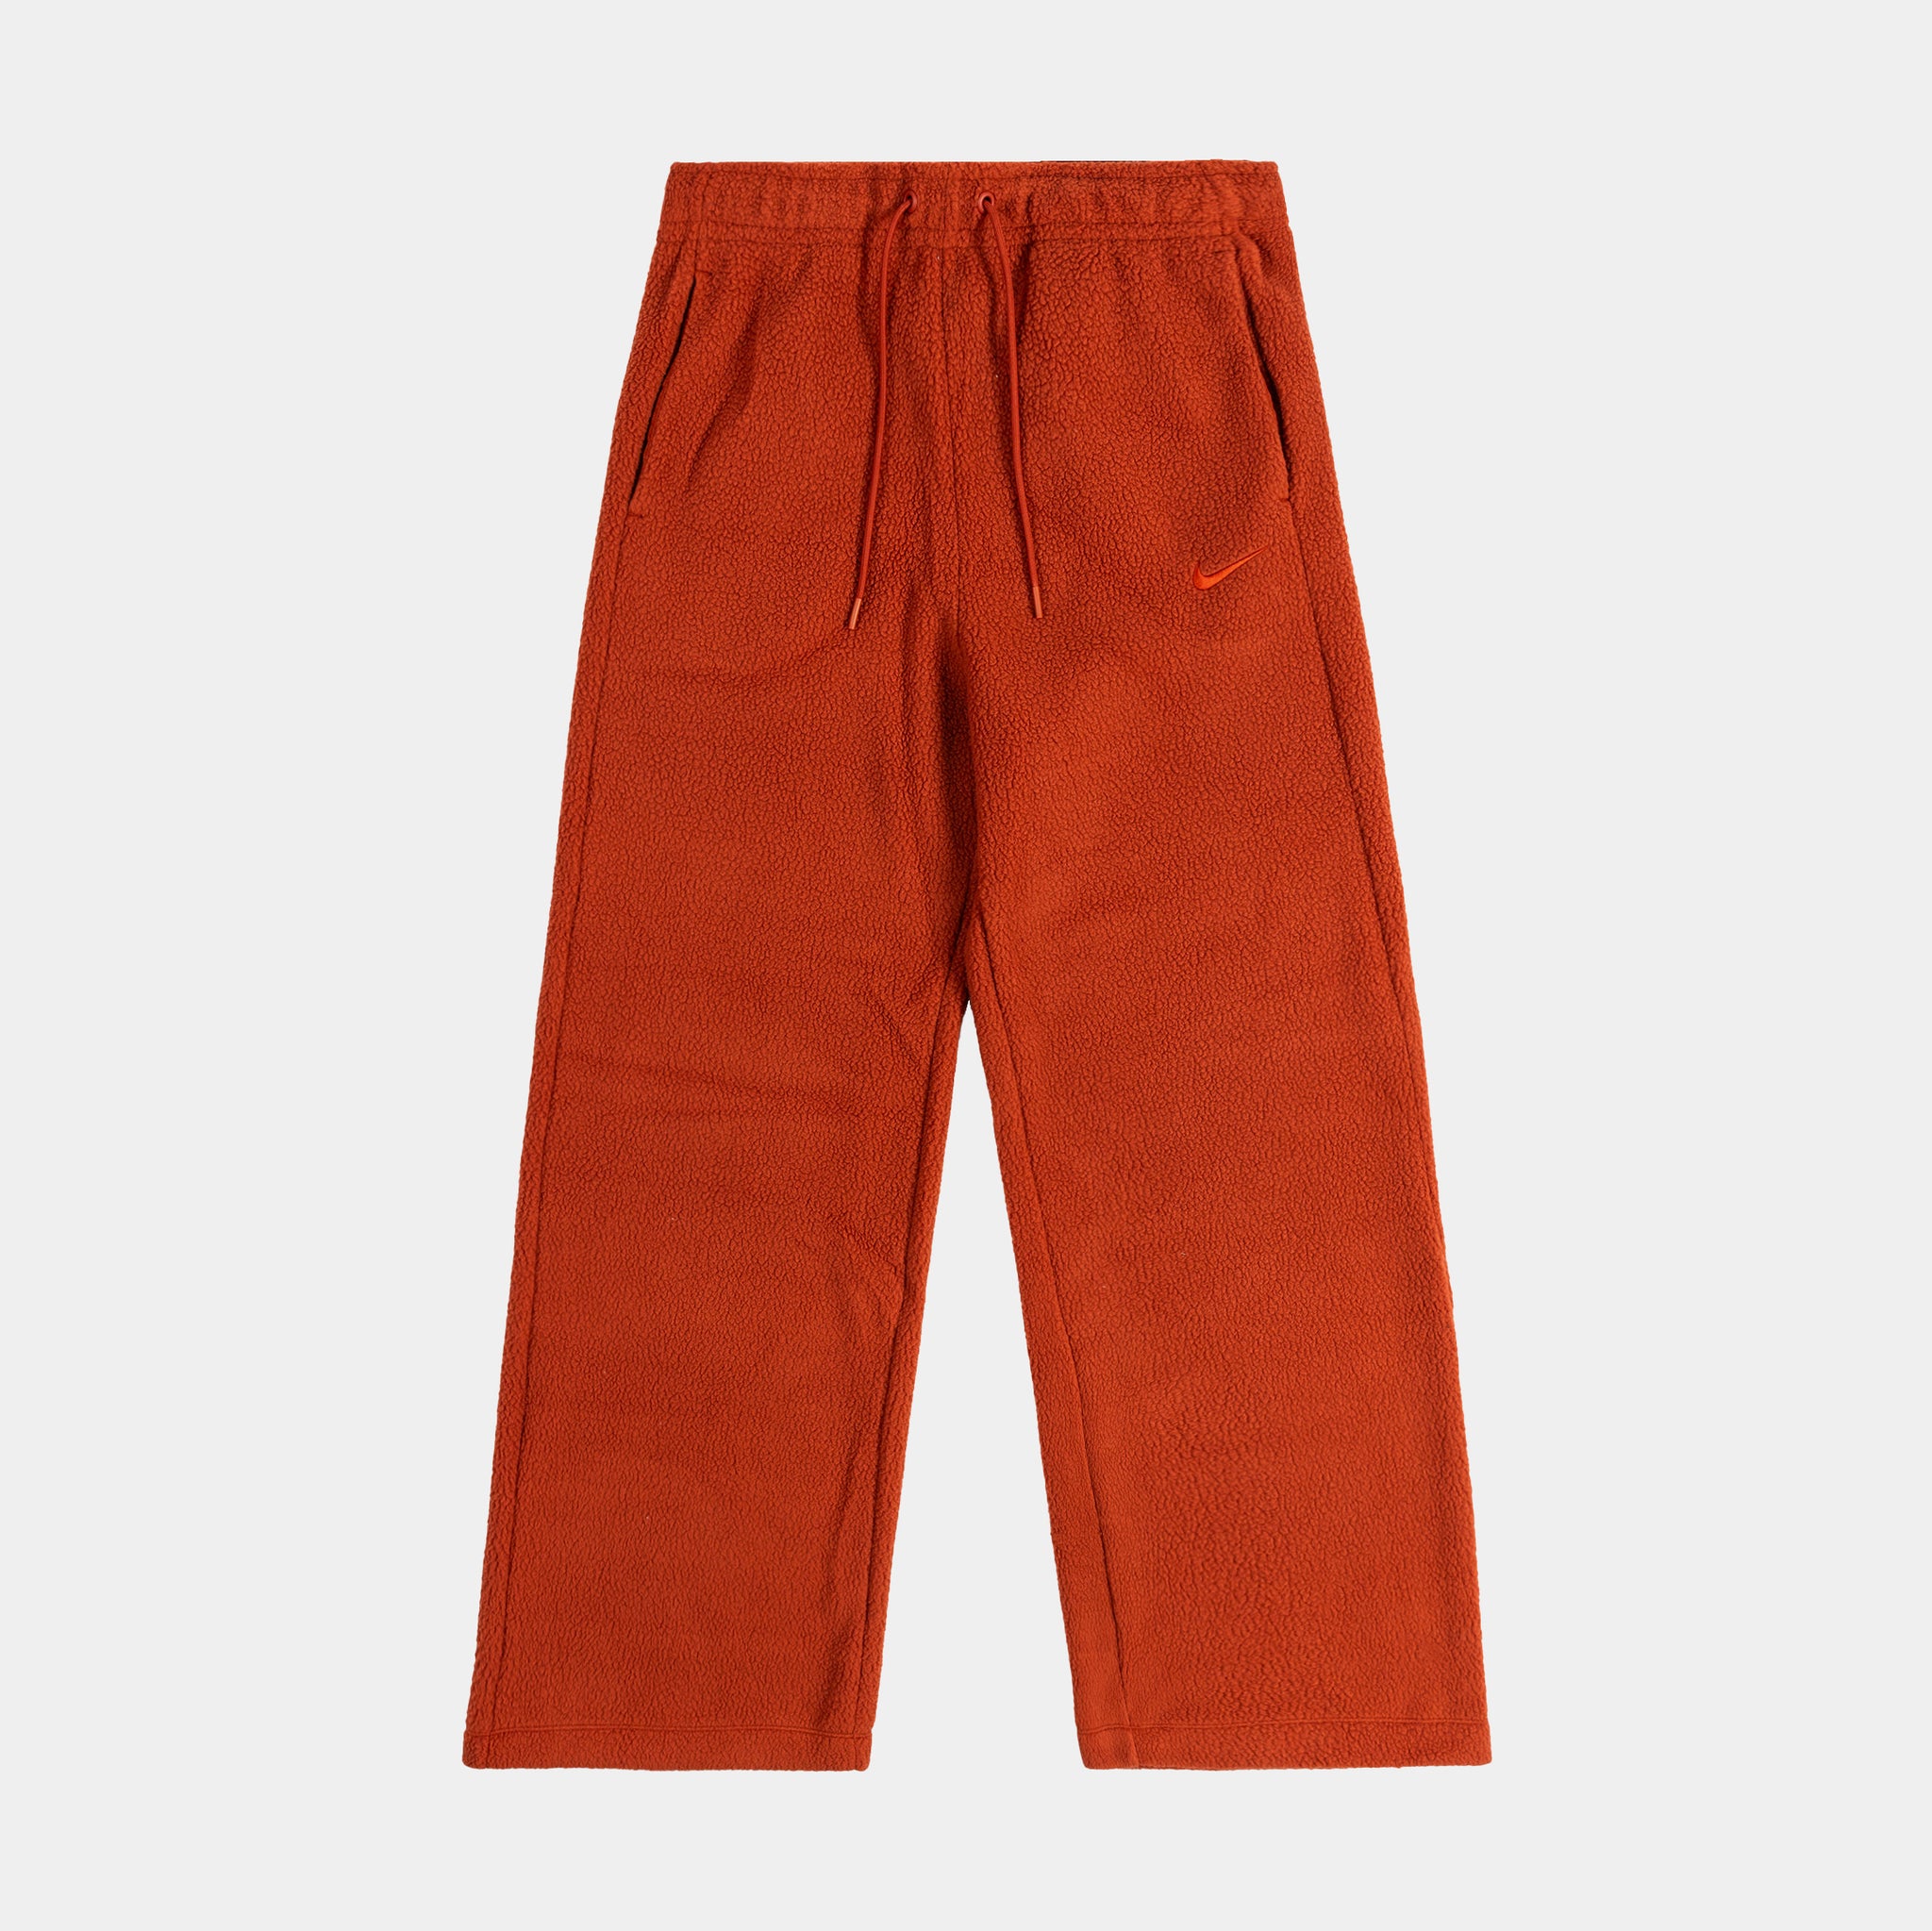 GB'S Sneaker Shop on X: Be Yourself and Look Great Doing It Nike Sportswear  NSW Woven Pants Women's (S - 2XL) $85 CT0880-845 (Orange) CT0880-639  (Ghyper pink) CT0880-453 (Pacific blue) CT0880-398 (Green